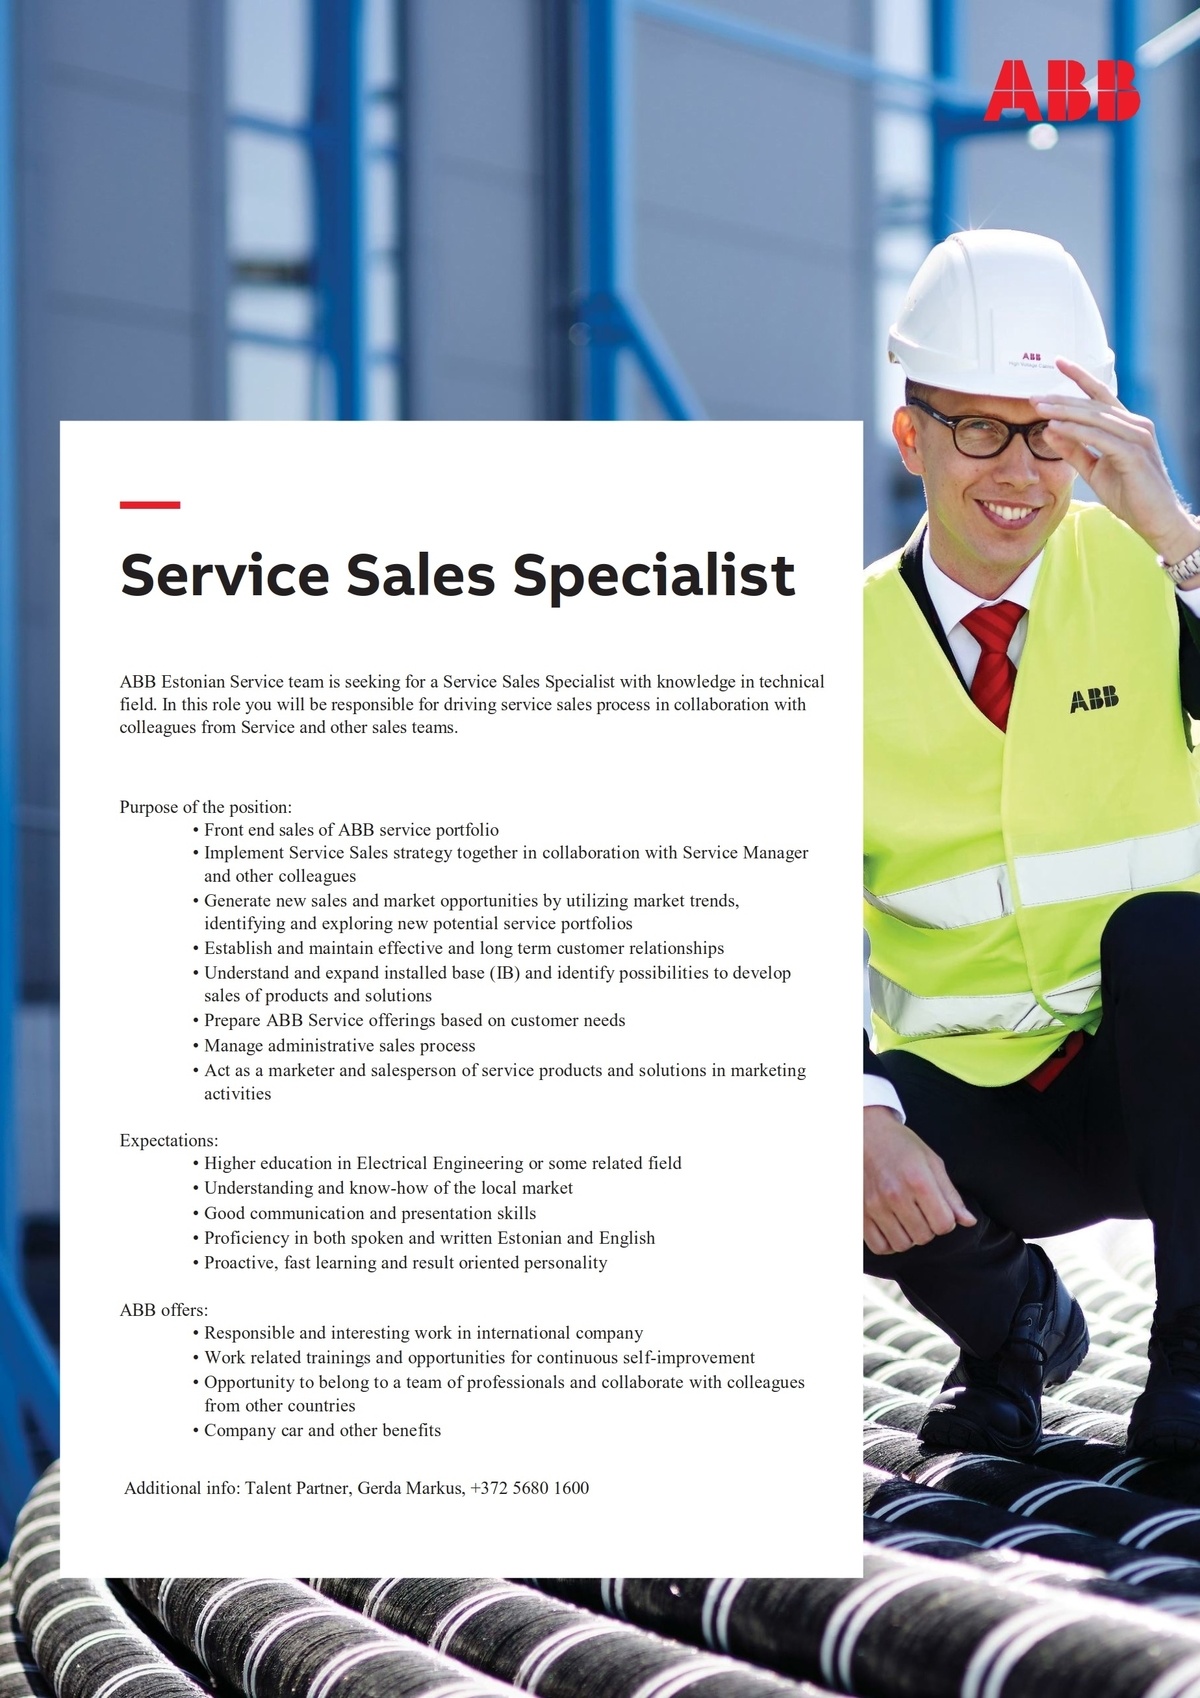 ABB AS Service Sales Specialist